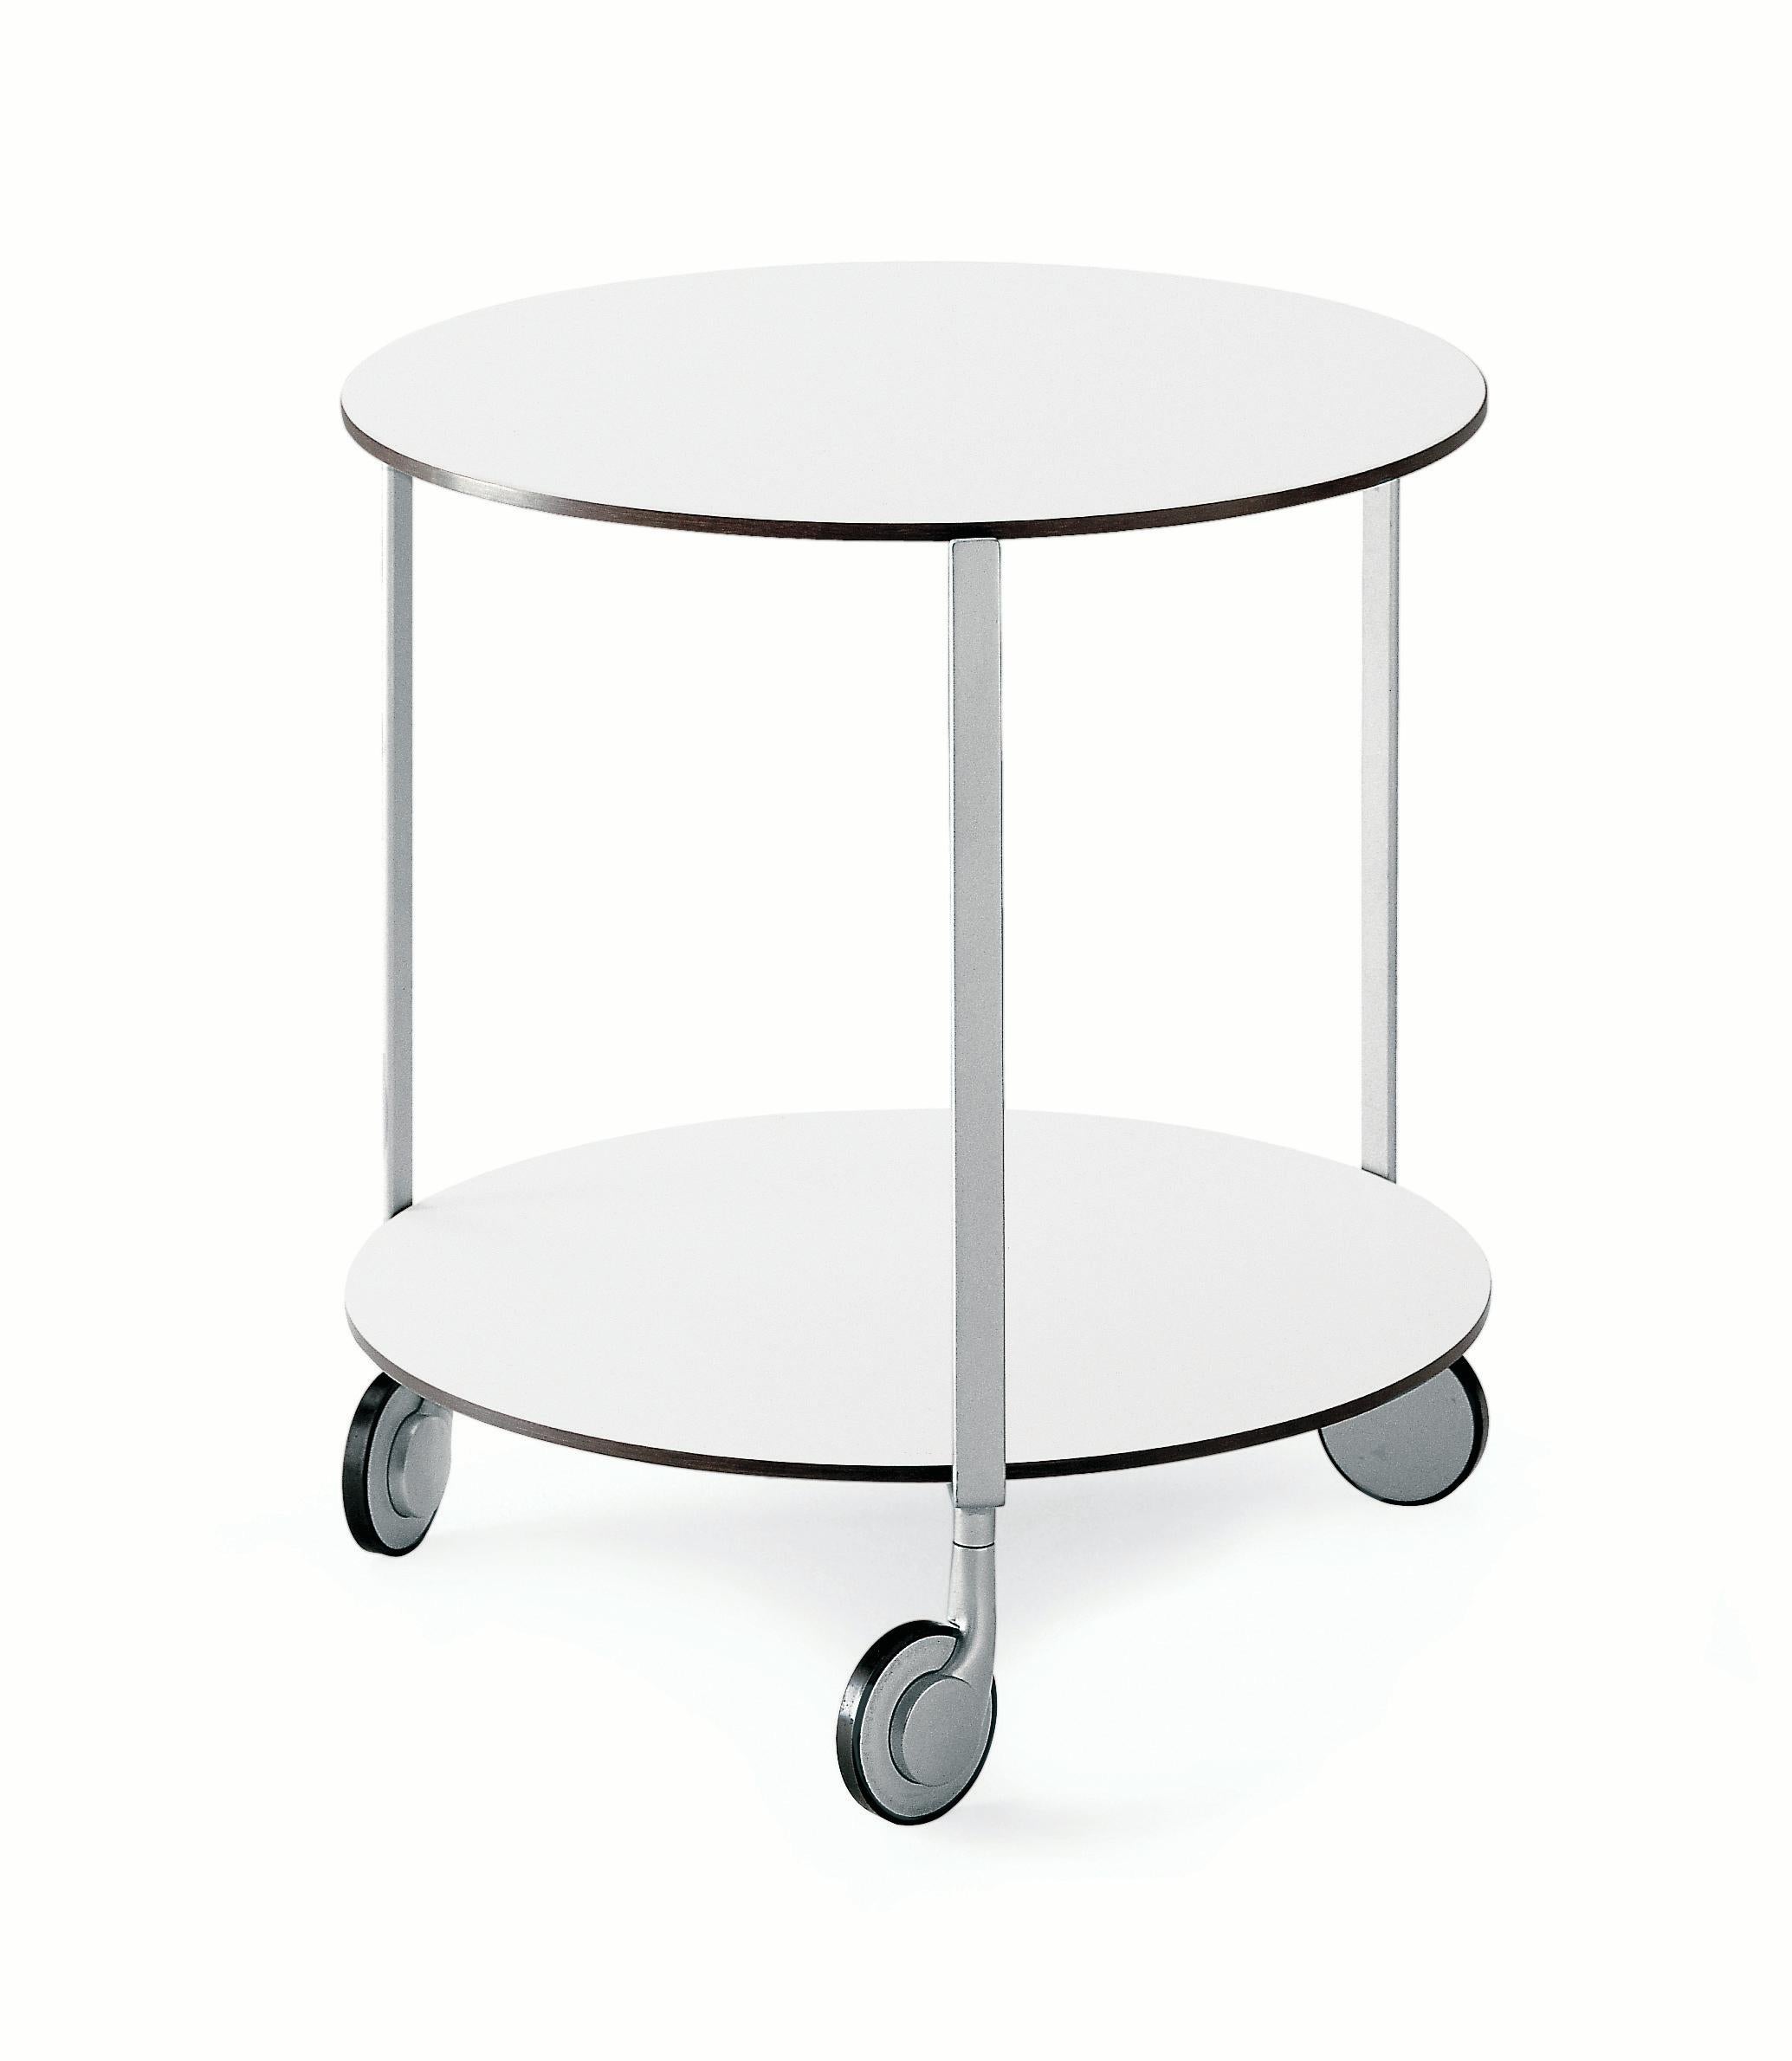 Zanotta Giro' Castor-Mounted Small Table with White Plastic Top by Anna Deplano

Castor-mounted table. Aluminium-painted steel frame. Shelves in layered plastic laminate in white.

Additional Information:
Material: Aluminium, steel,